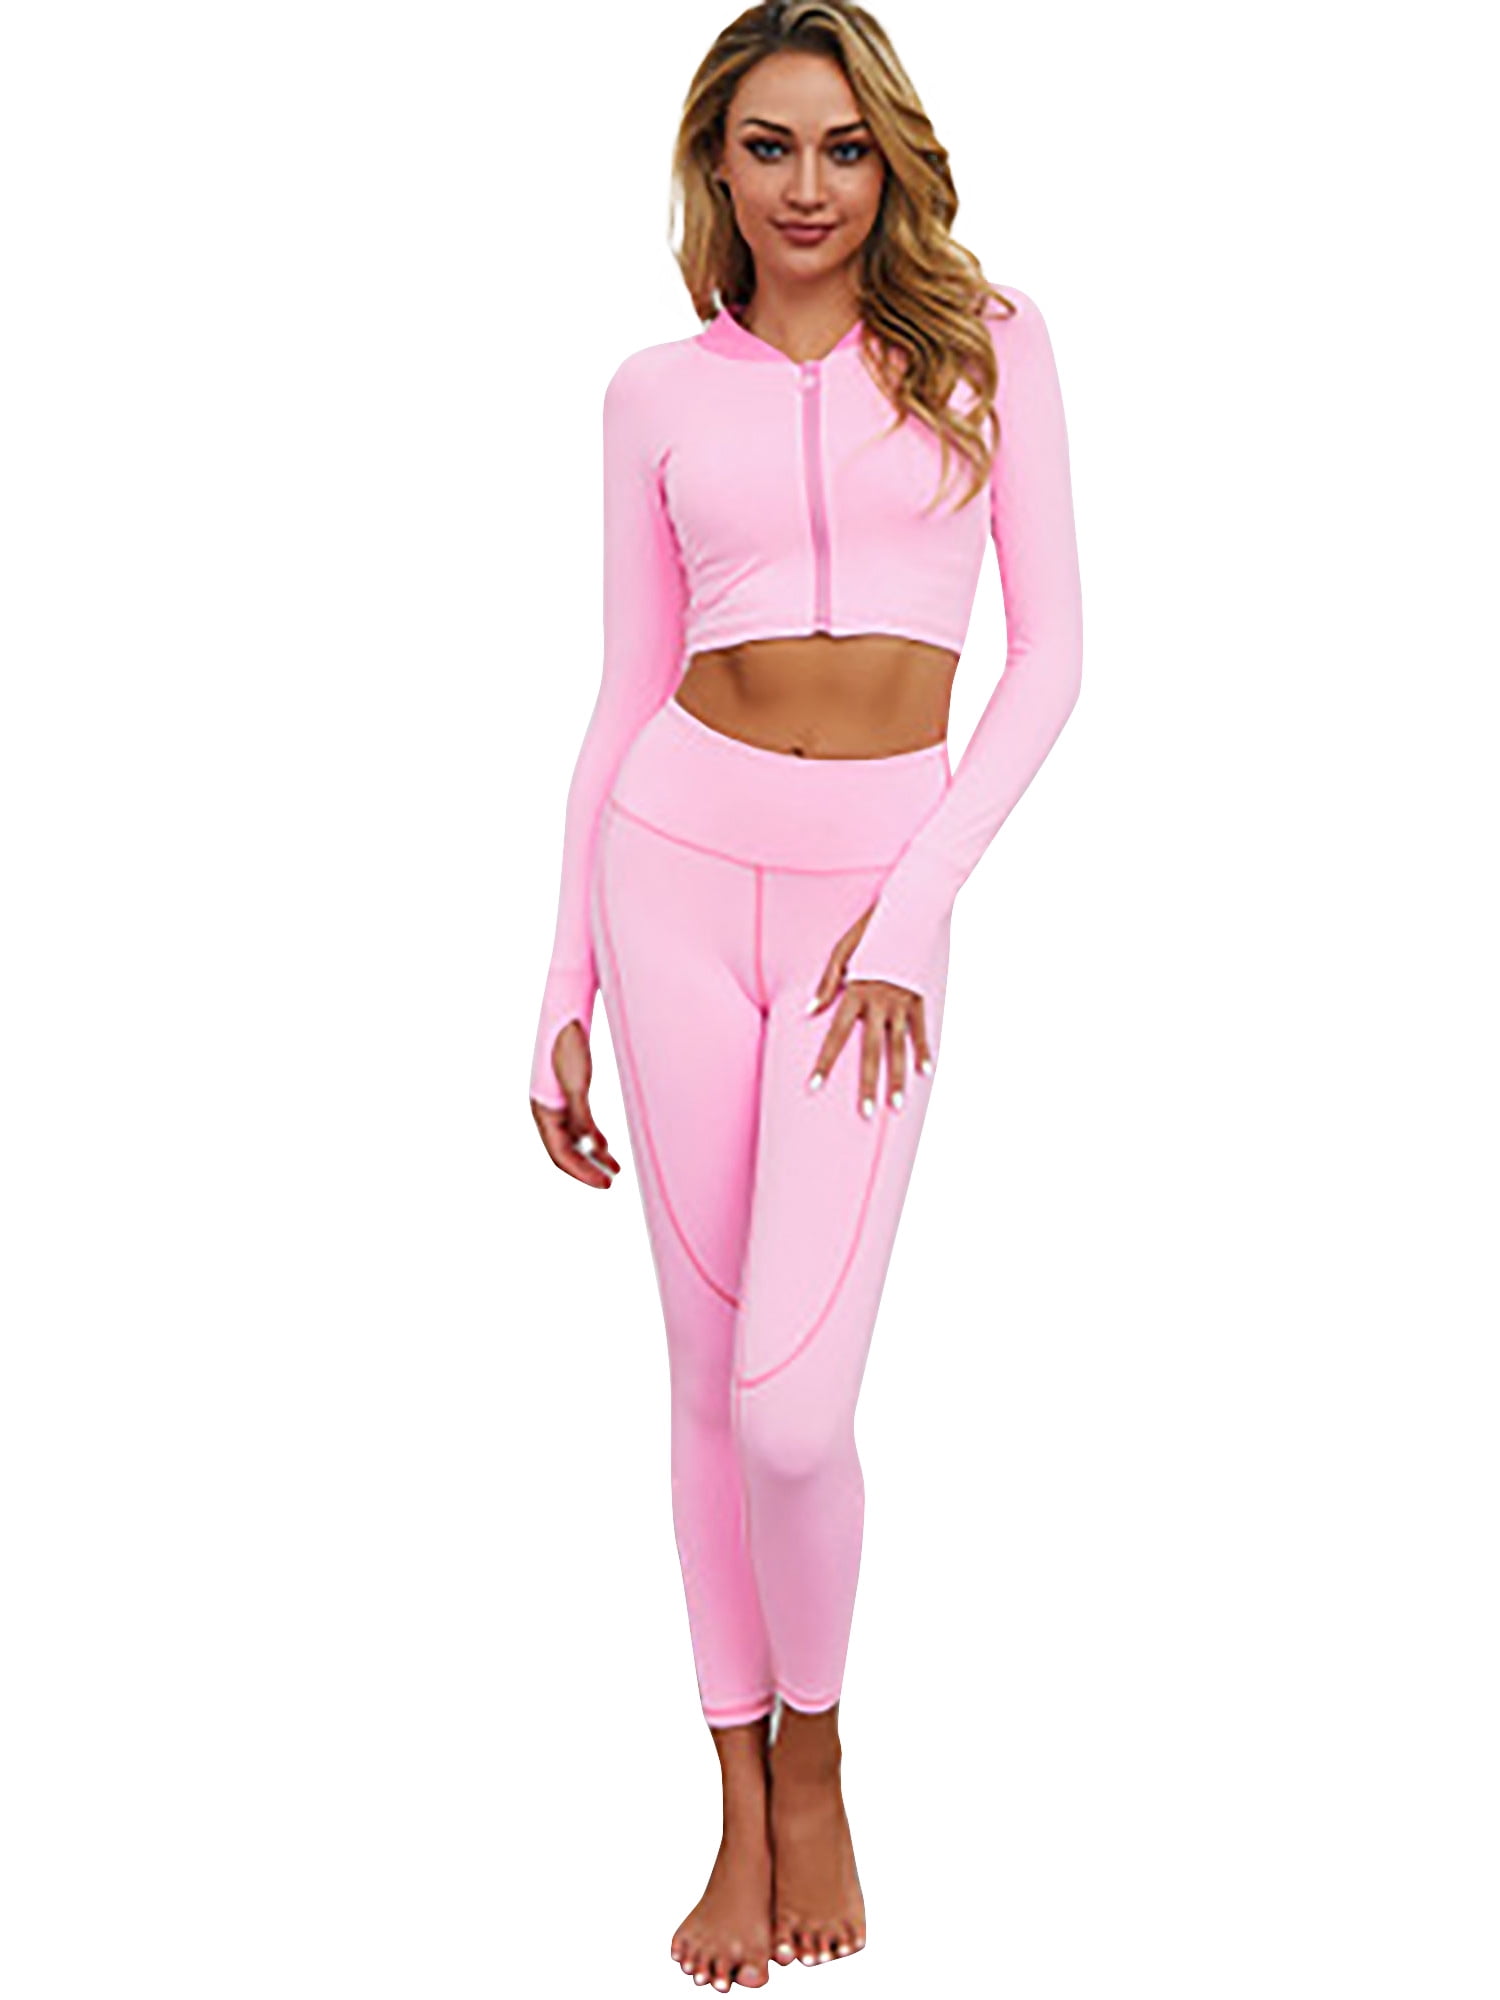 Simple Pink workout gear for Burn Fat fast